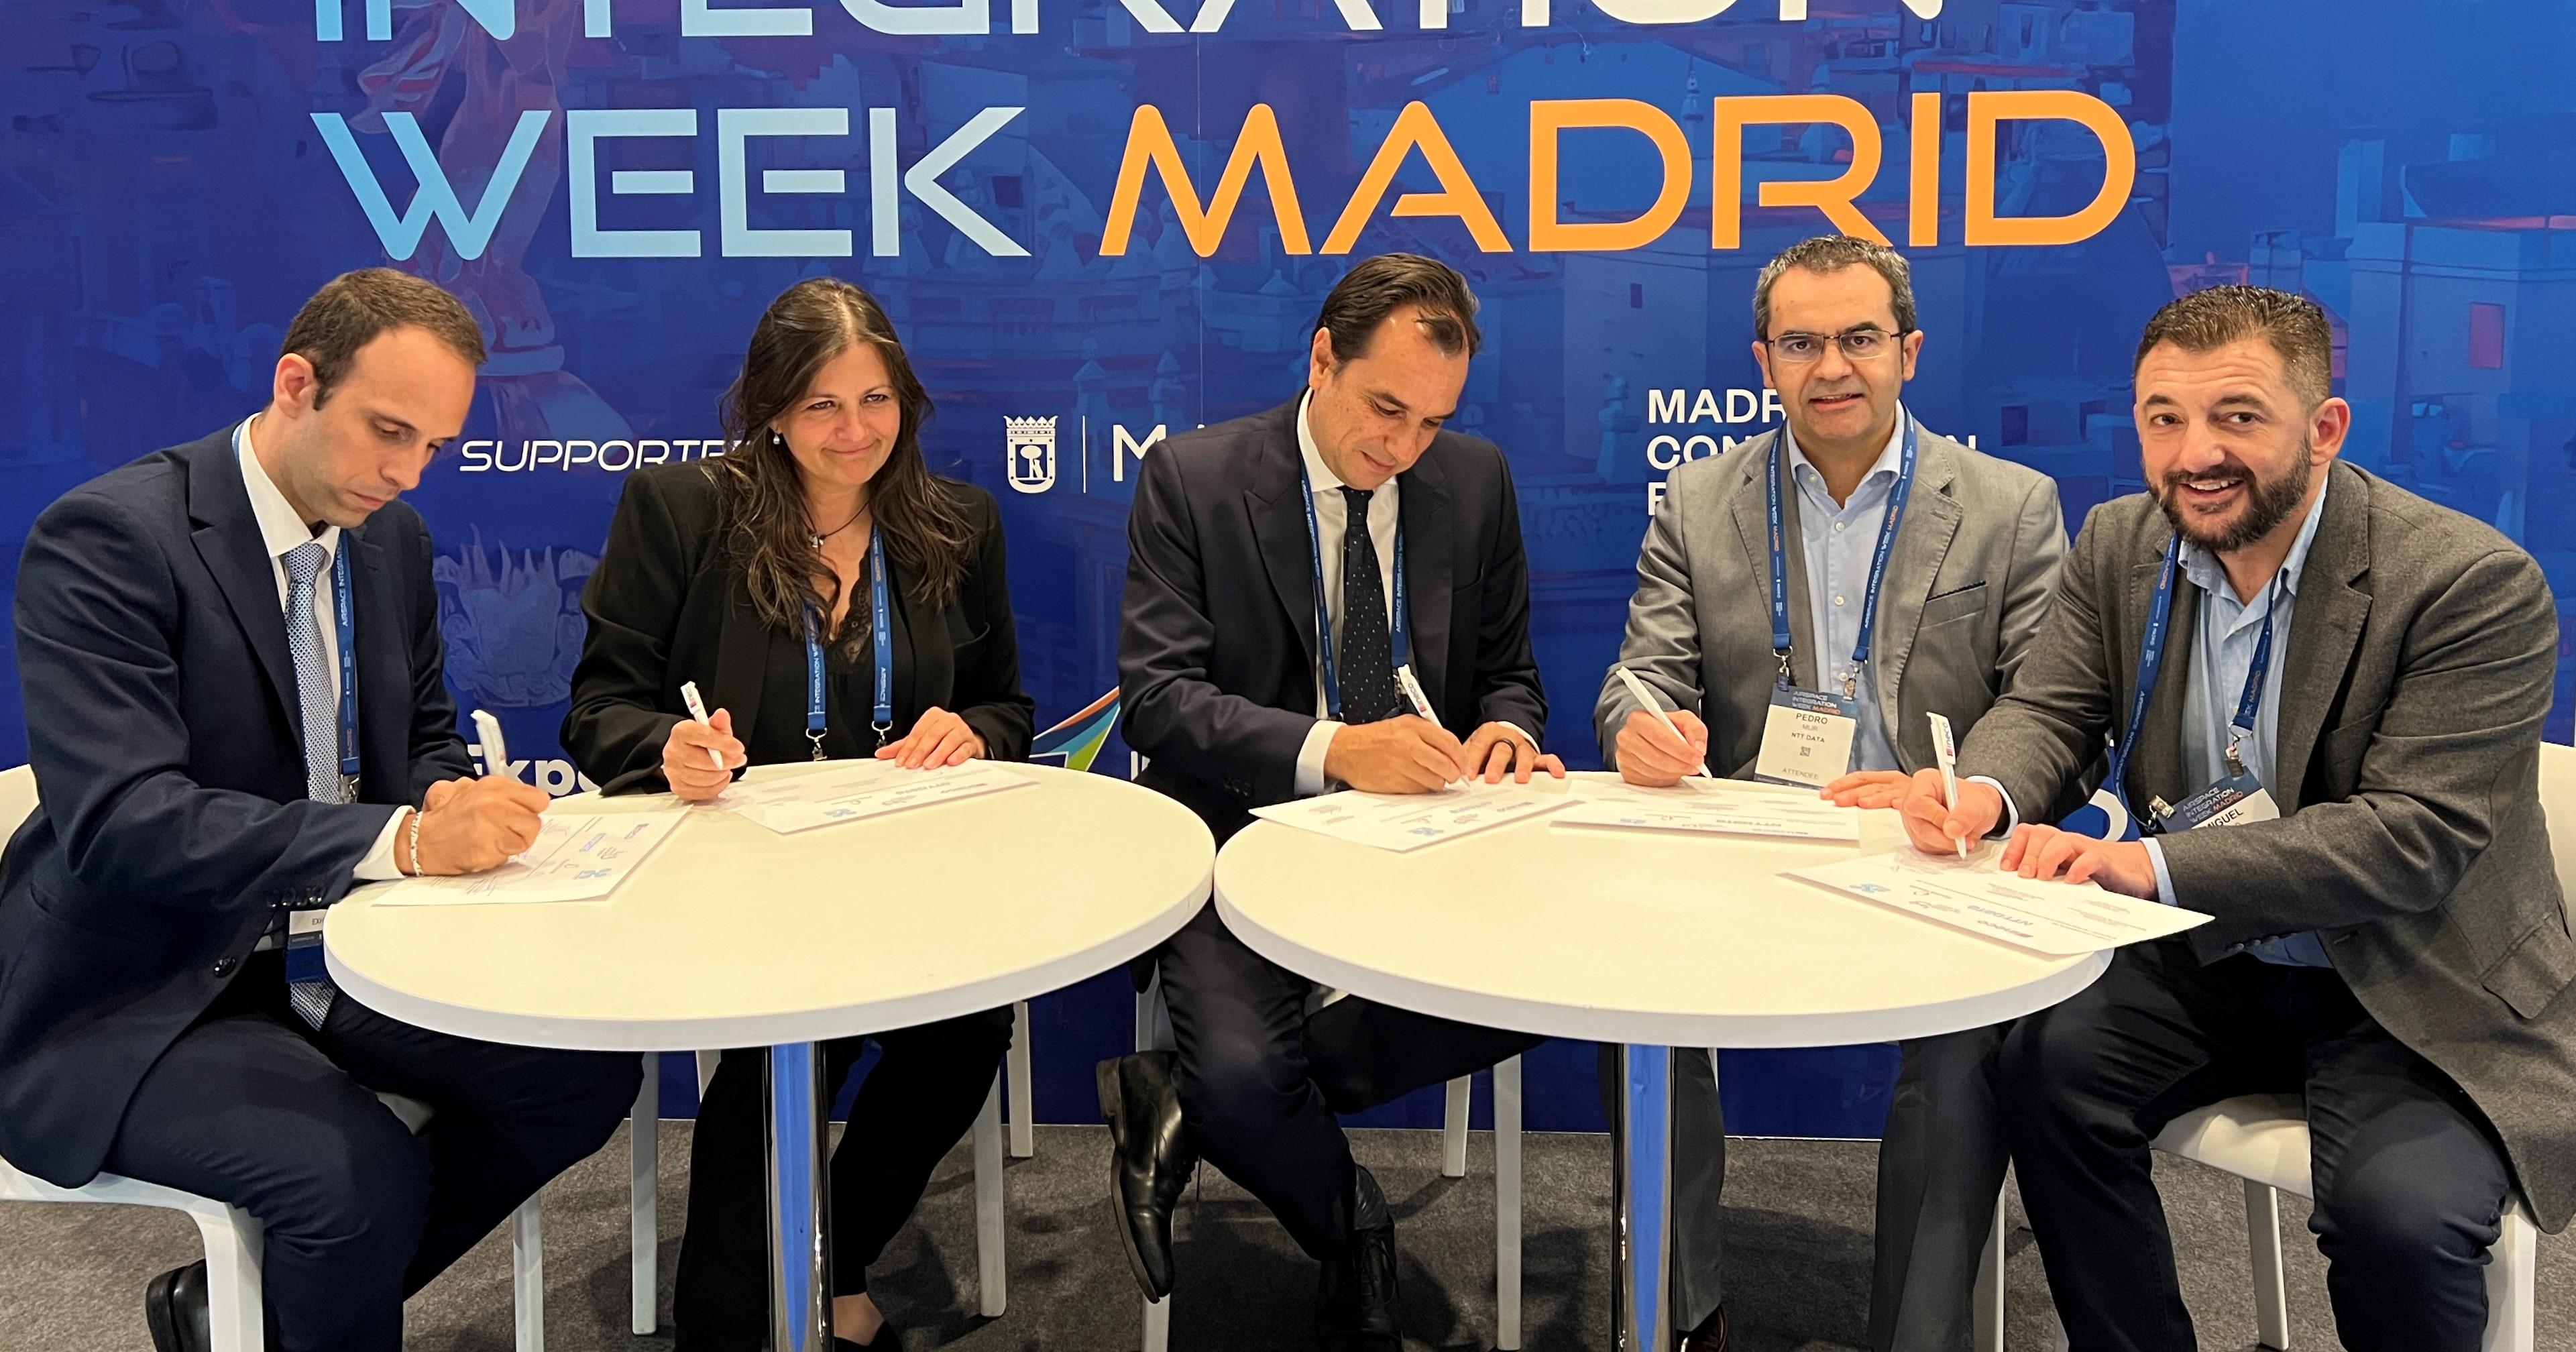 The president of Ineco, Sergio Vázquez Torrón, Expodrónica director, Isabel Buatas, the head of R&D of the UAS Division of ITG, Enrique Ventas, the partner responsible for transport, logistics and mobility, José Pedro Mur and Pinsent Masons partner, Miguel Nieto, have sealed this agreement which represents a boost for the new era of air mobility for passenger and cargo transport.